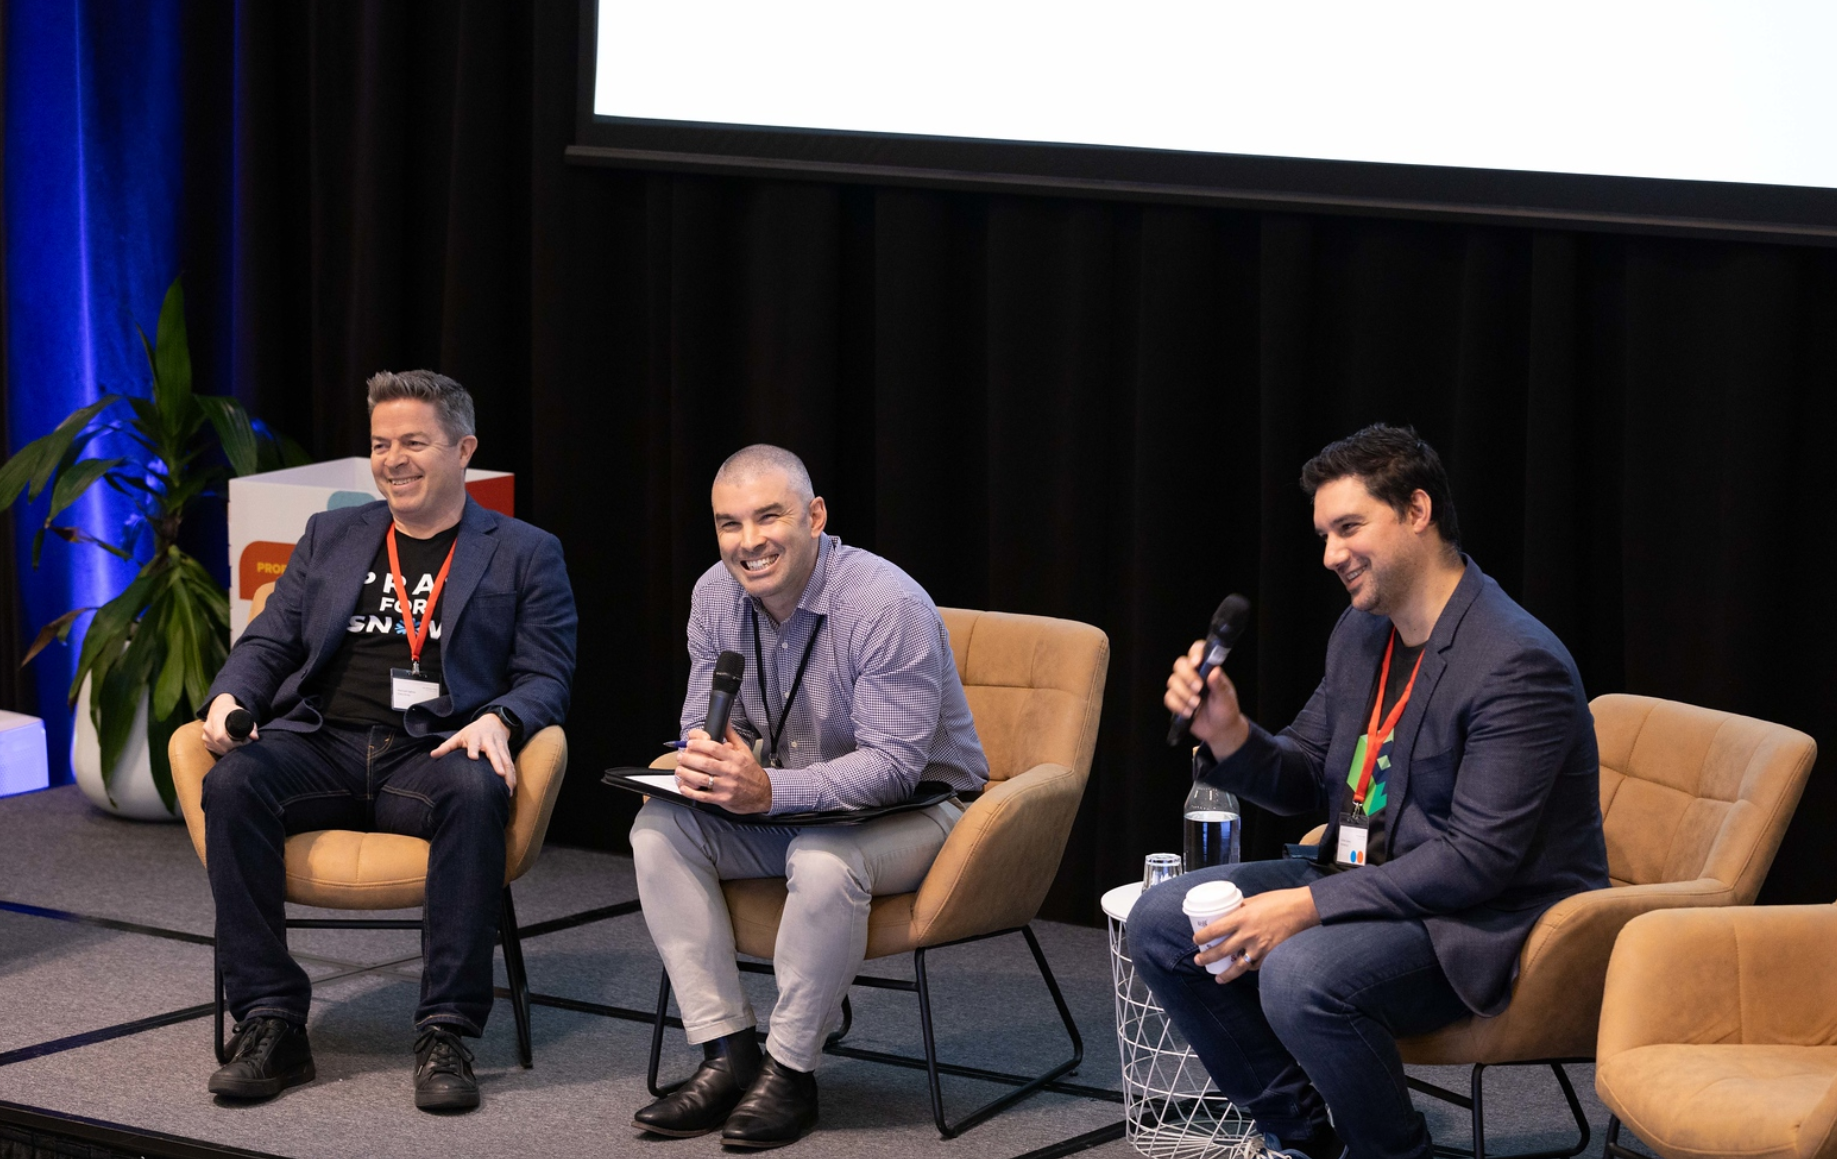 Clive Astbury, Director, Sales Engineering, ANZ, Snowflake, Michael Ogilvie, Founder of The Proptech Cloud and Data Army, with Dr Ben Coorey, Founder and CEO of Archistar